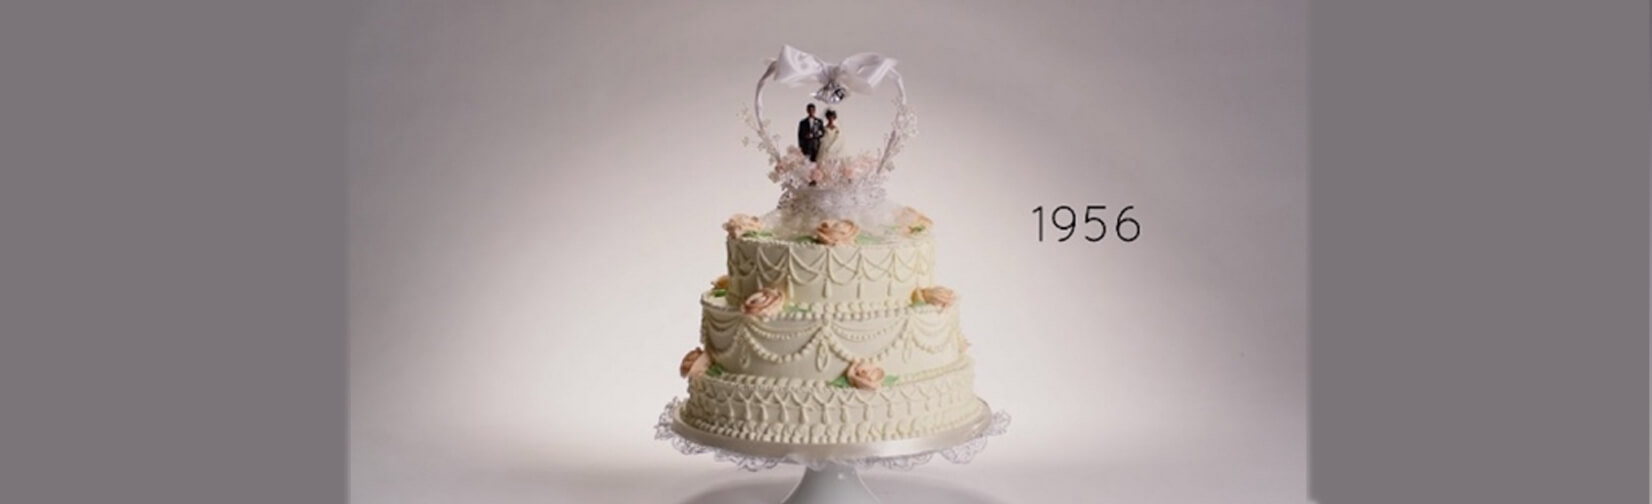 Stunning confections have evolved over the past 100 years